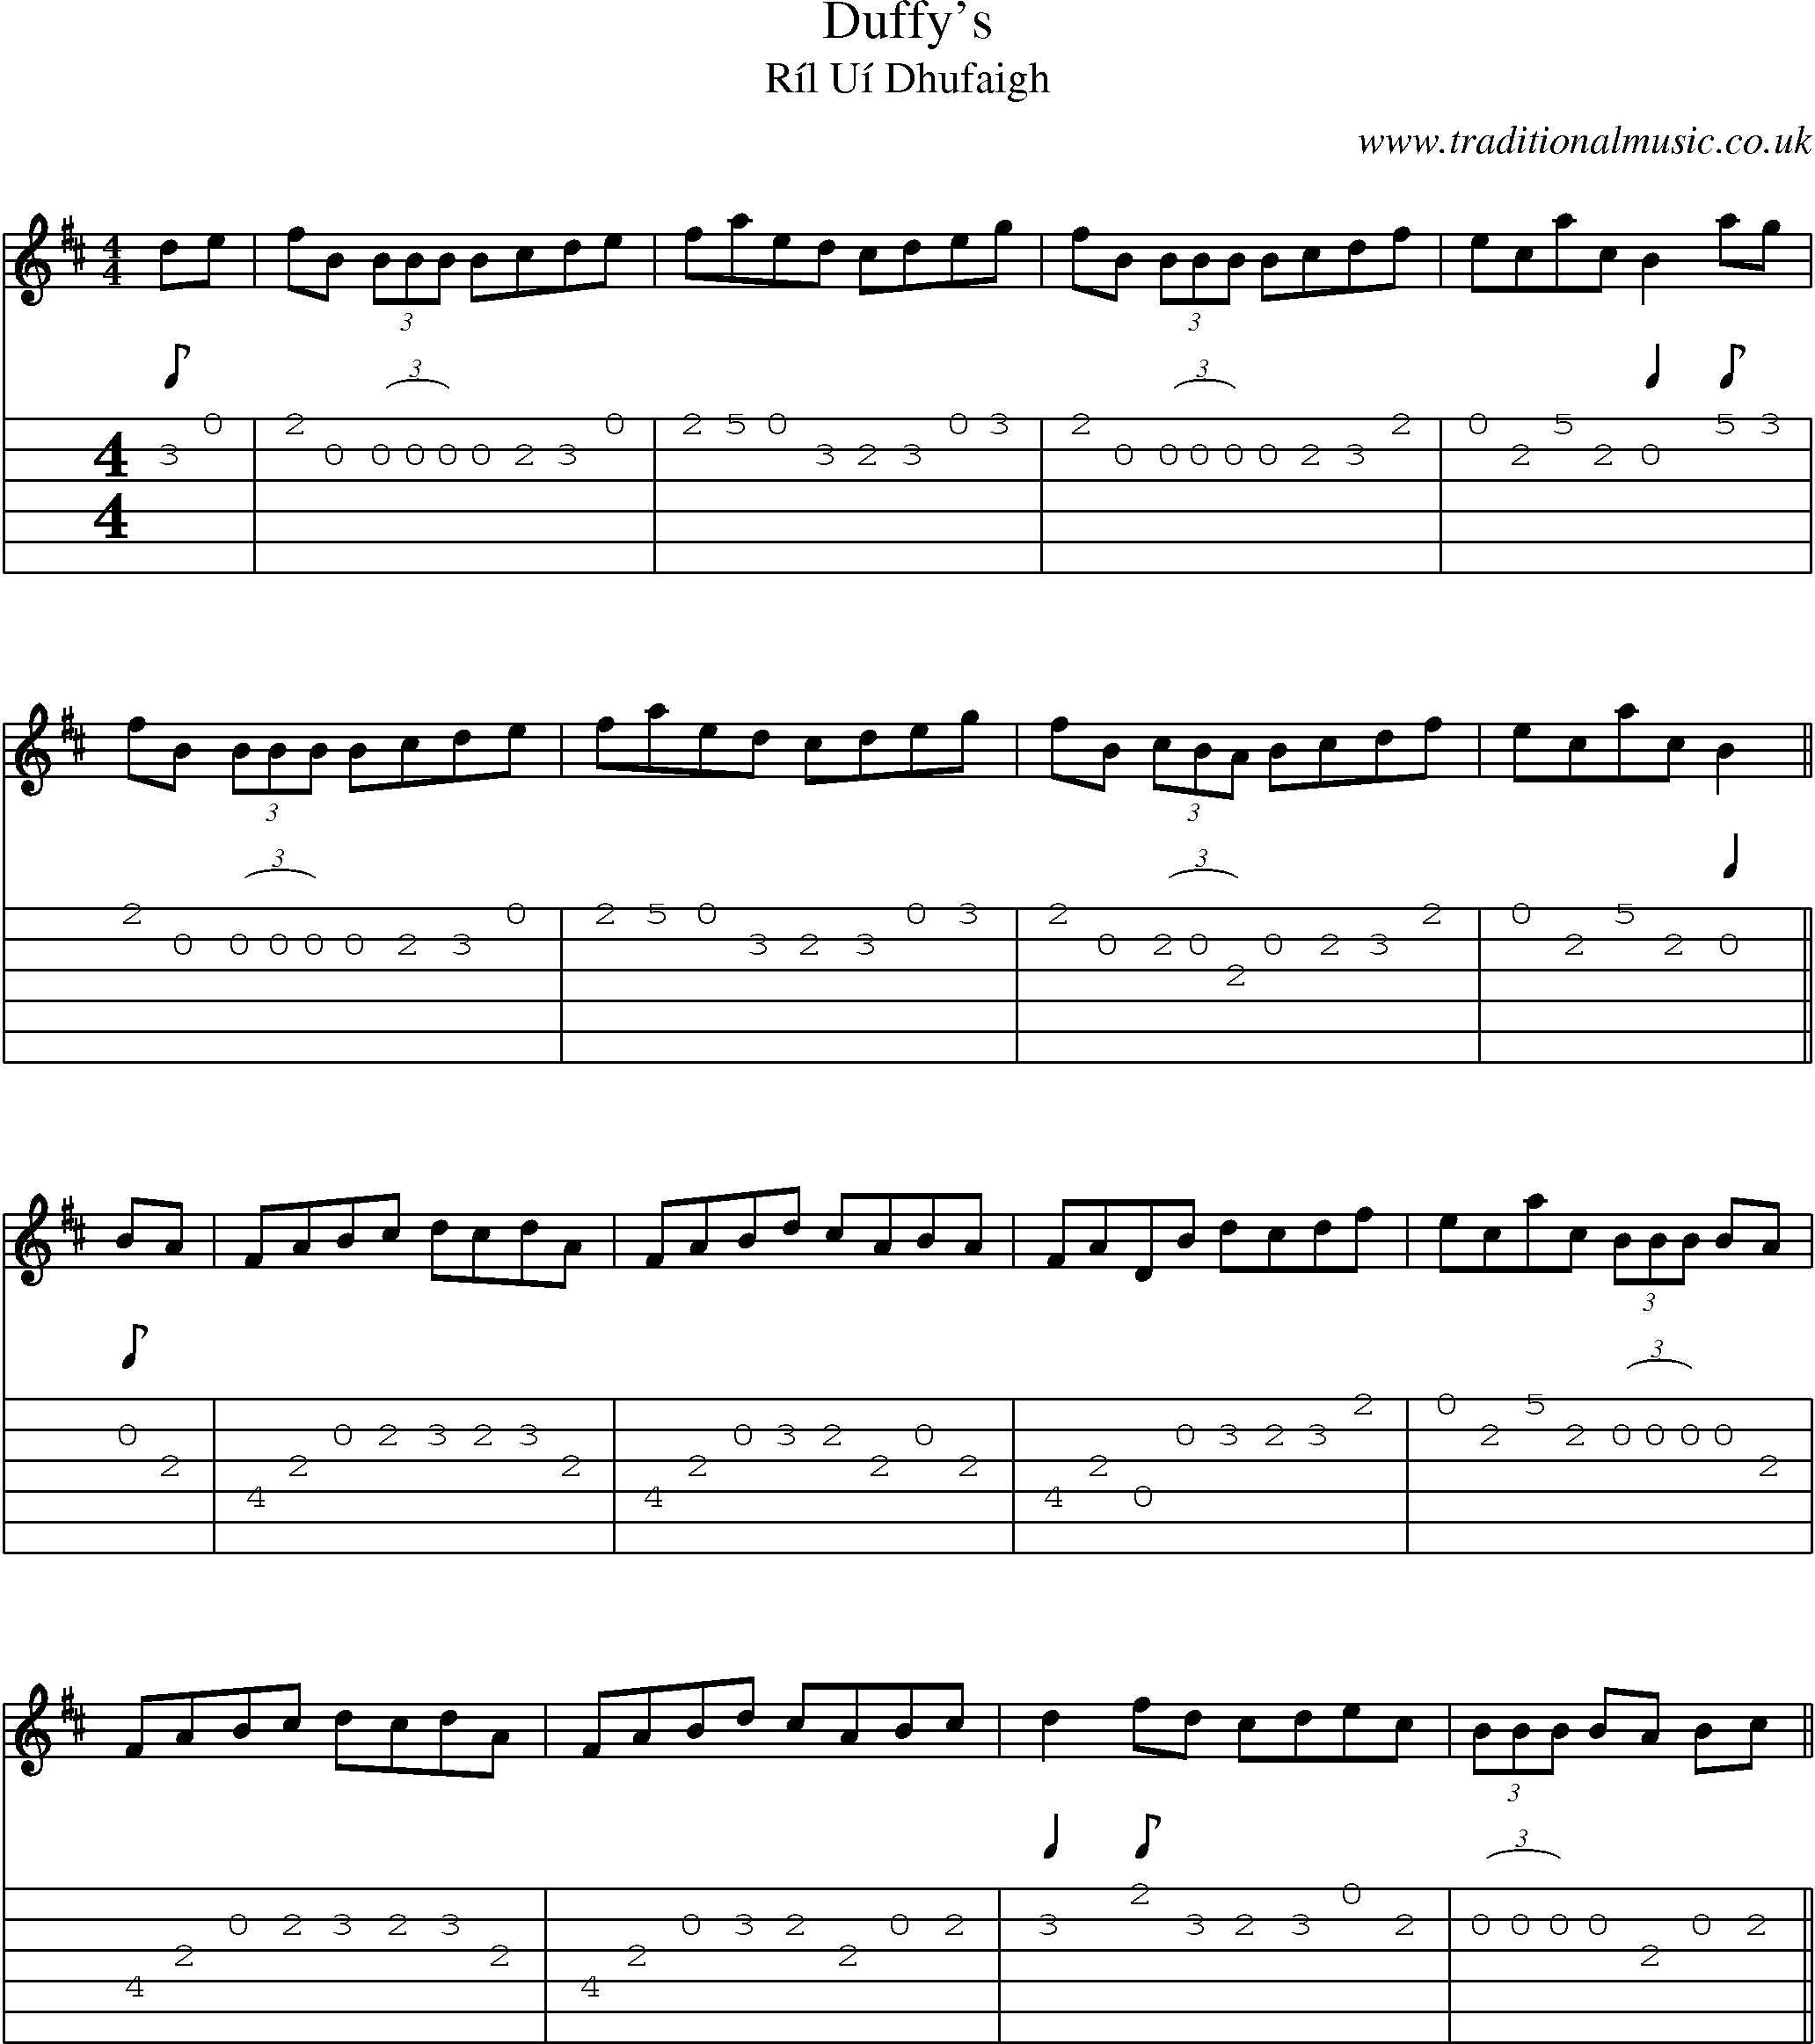 Music Score and Guitar Tabs for Duffys